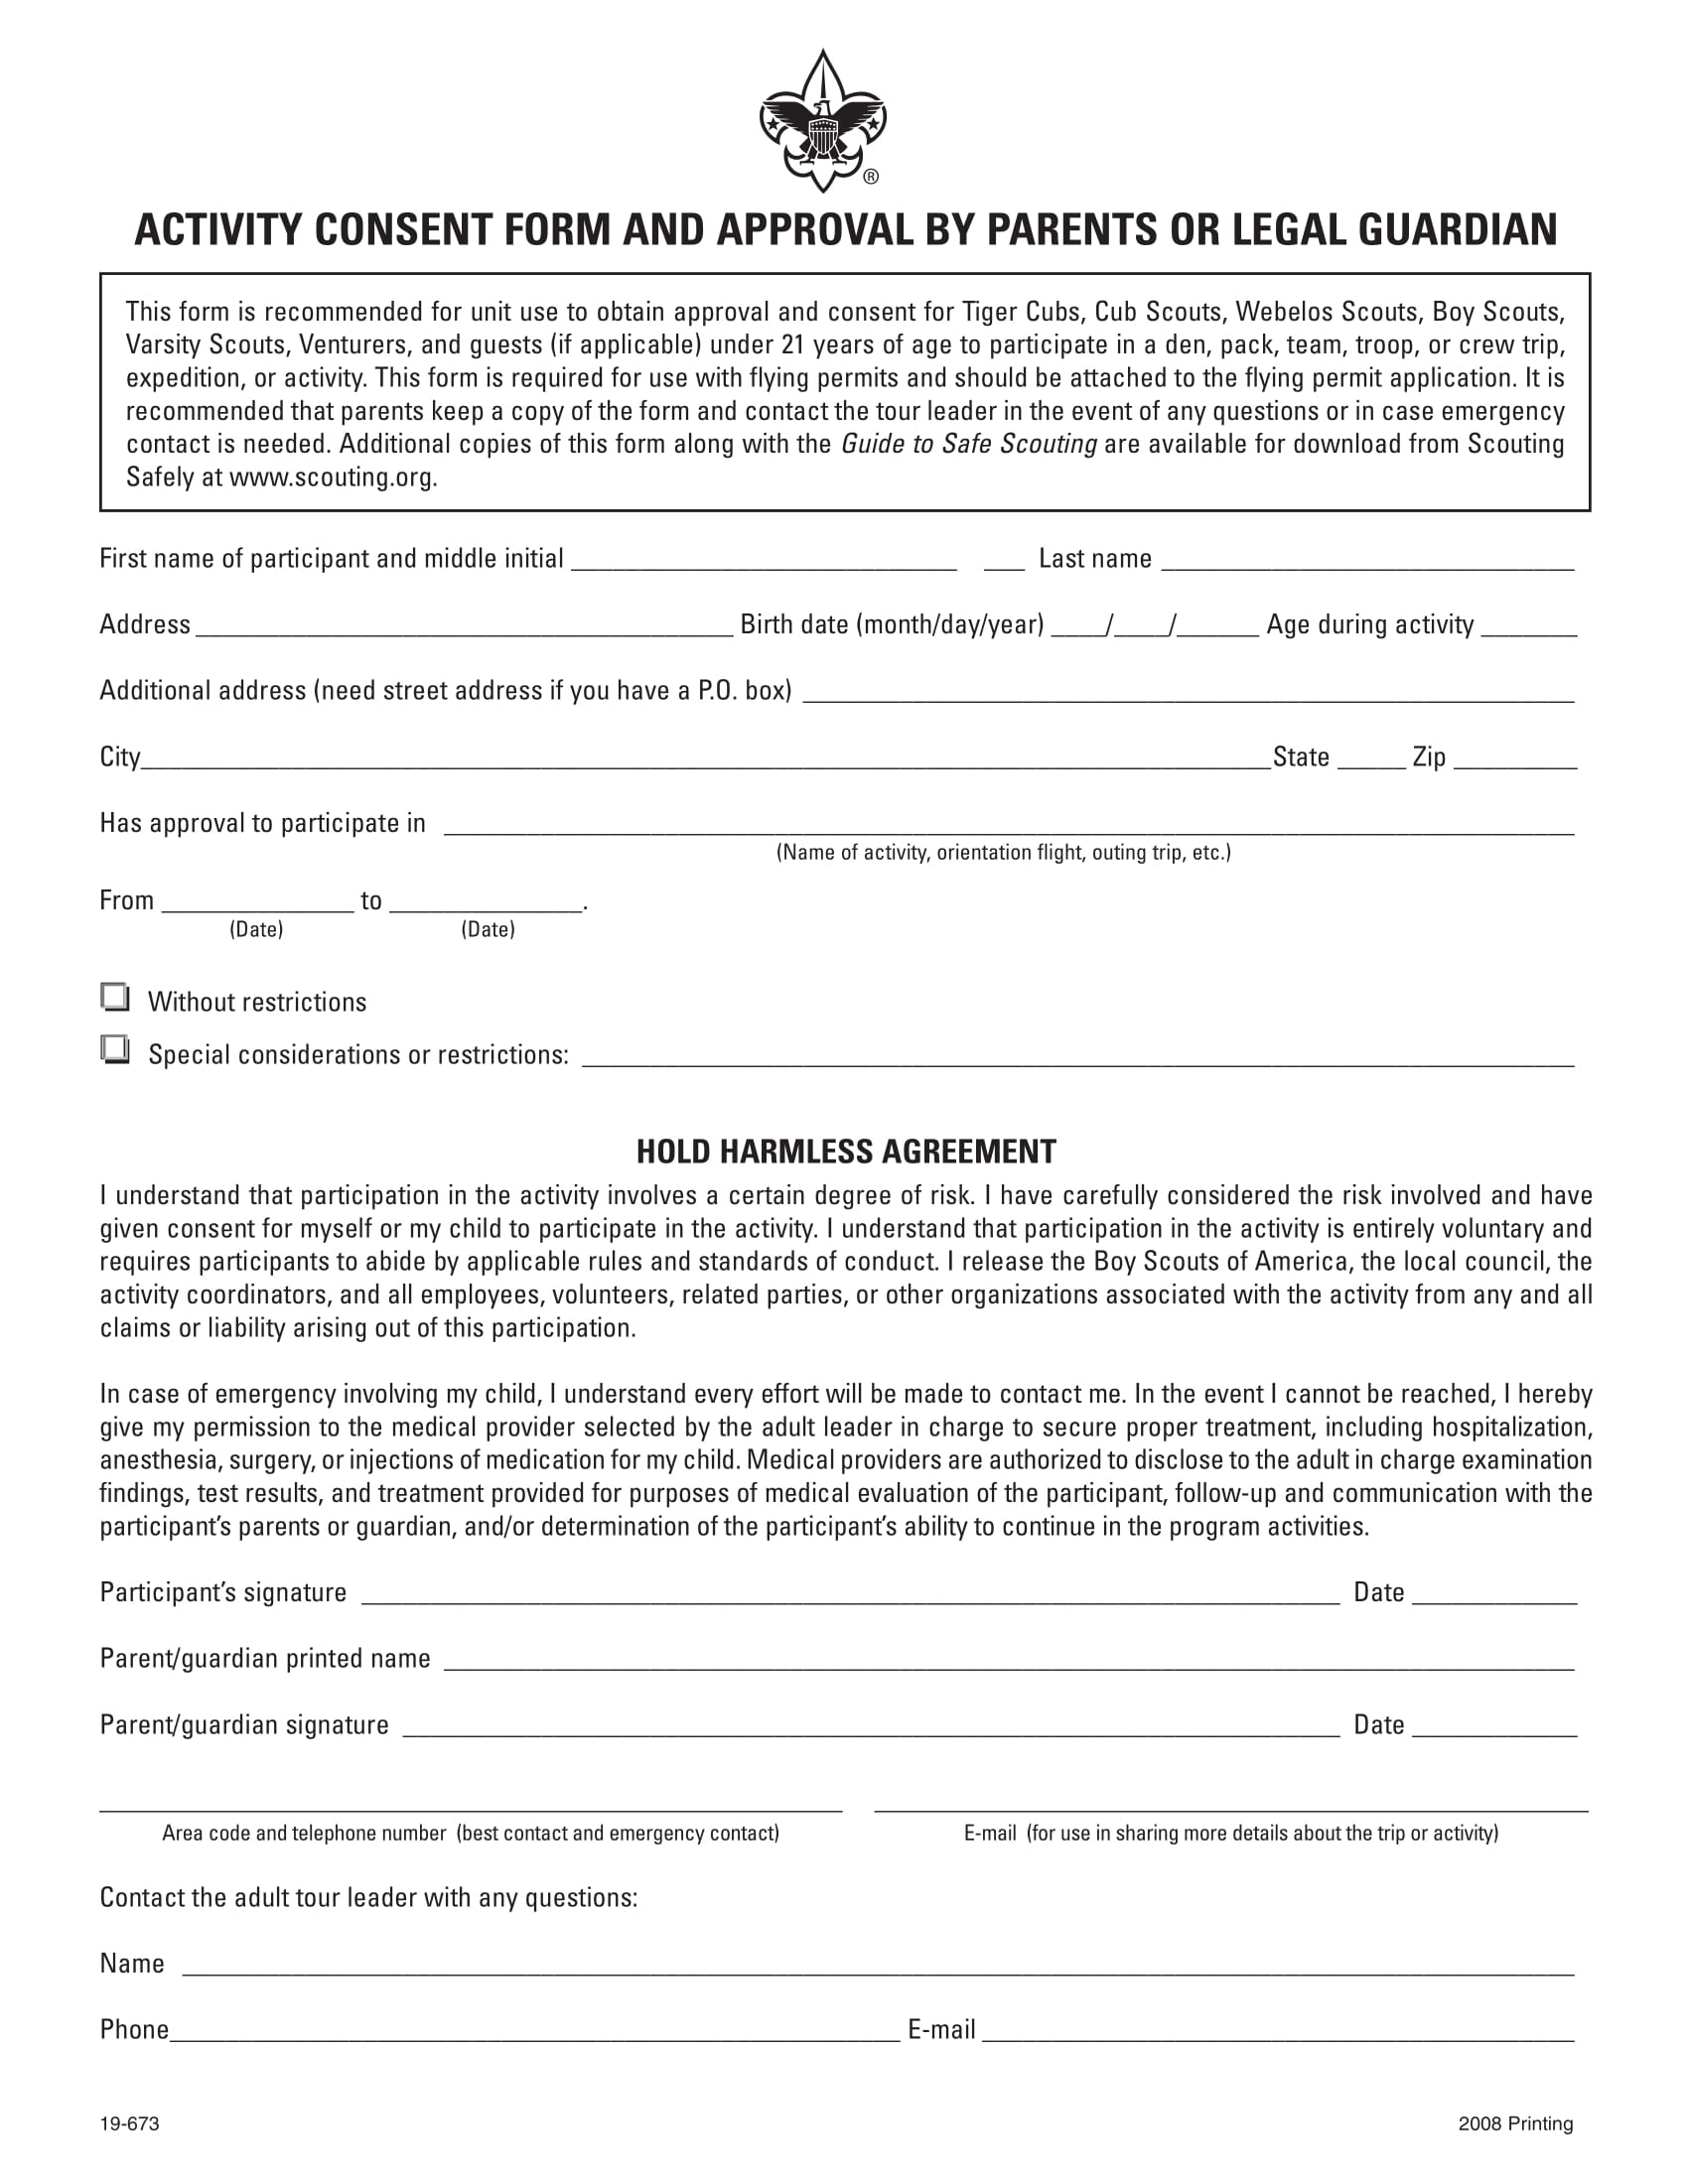 activity consent form and parent’s approval 1